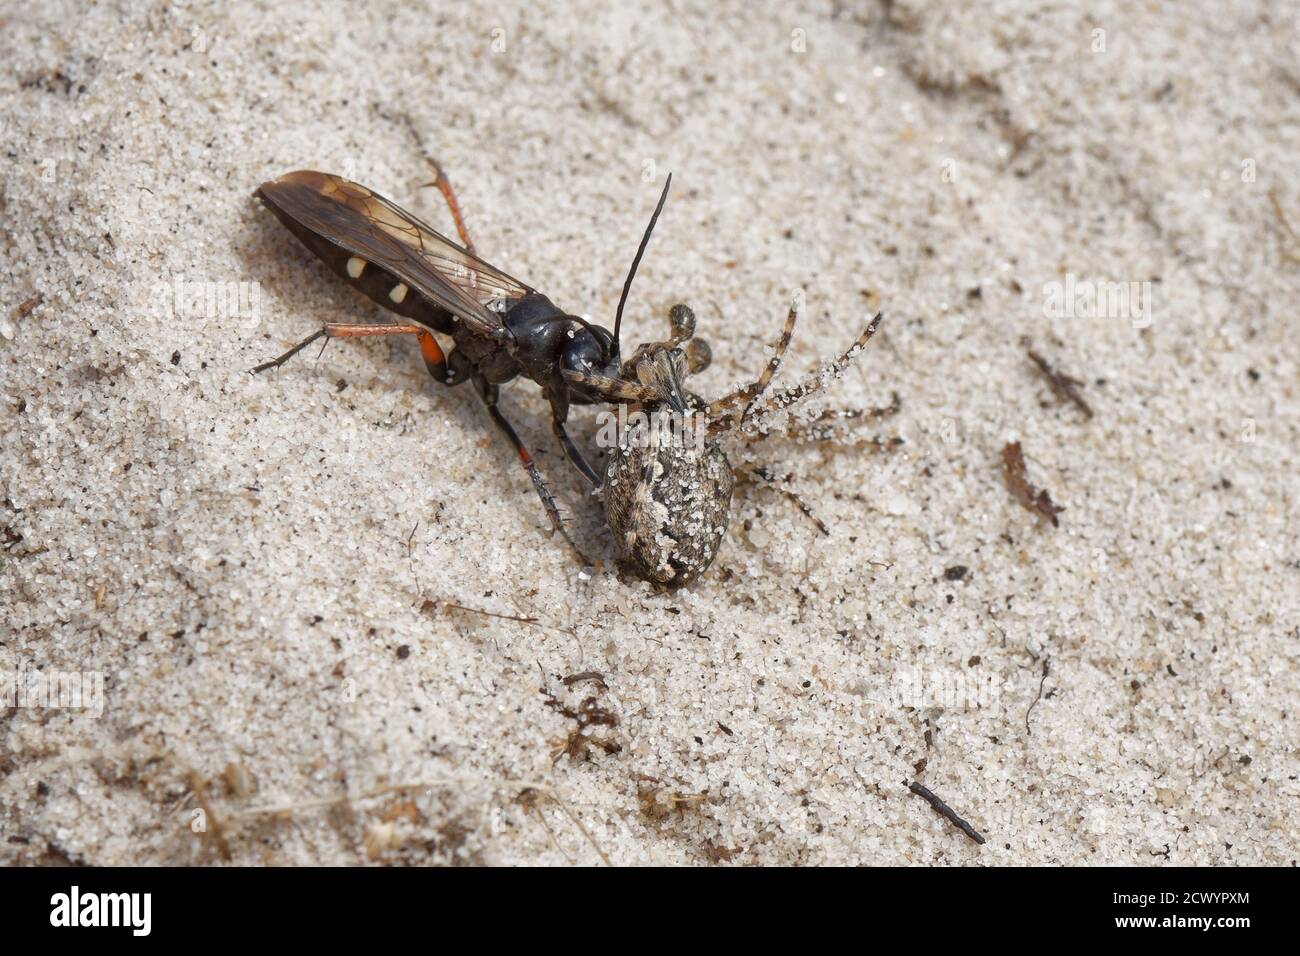 Red-legged spider wasp (Episyron rufipes) dragging a Missing sector orb weaver (Zygiella x-notata) to its nest burrow in sandy heathland, Dorset, UK Stock Photo